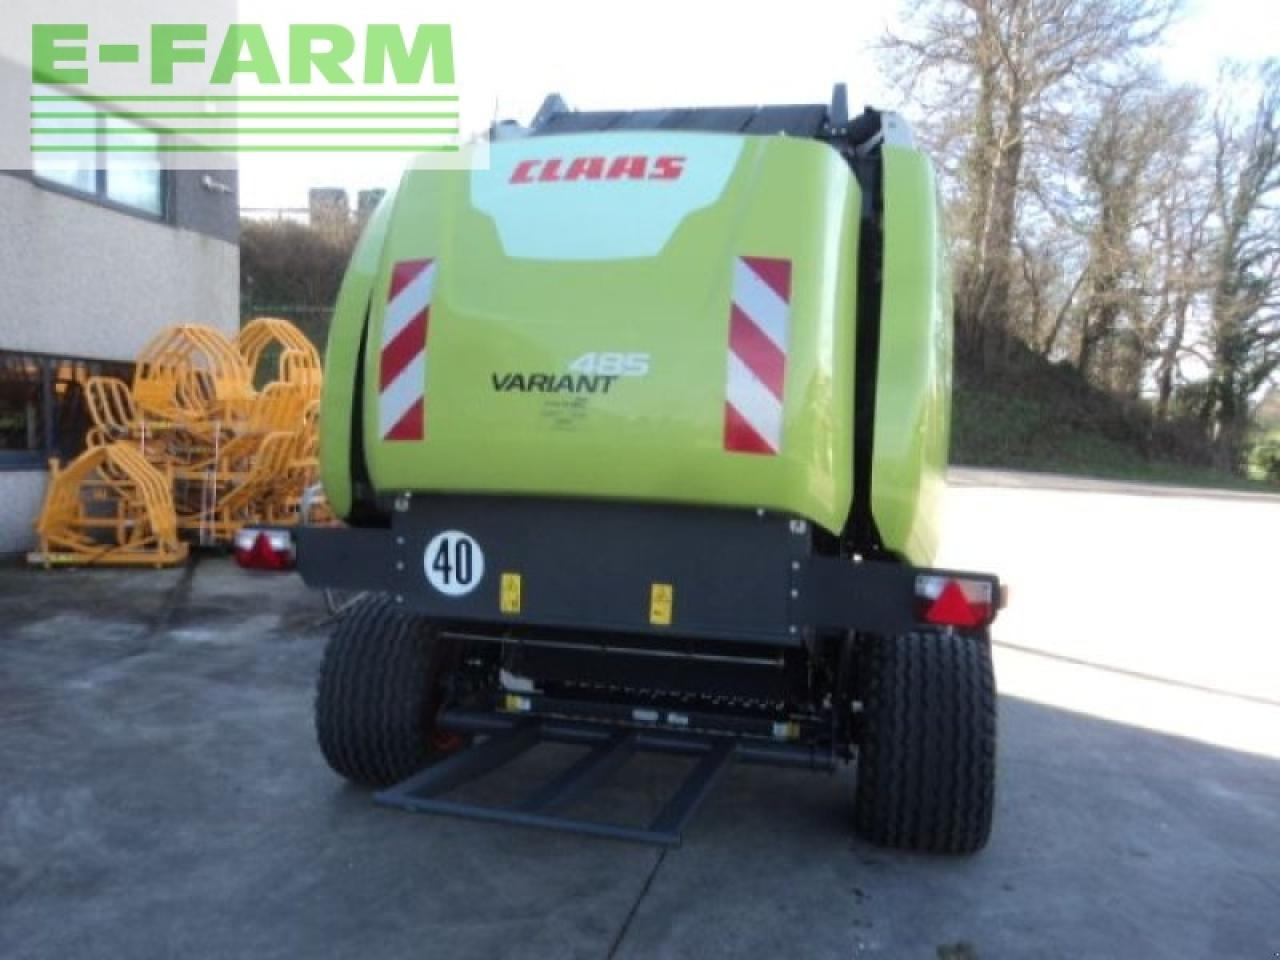 Tracteur agricole CLAAS variant 485 rc